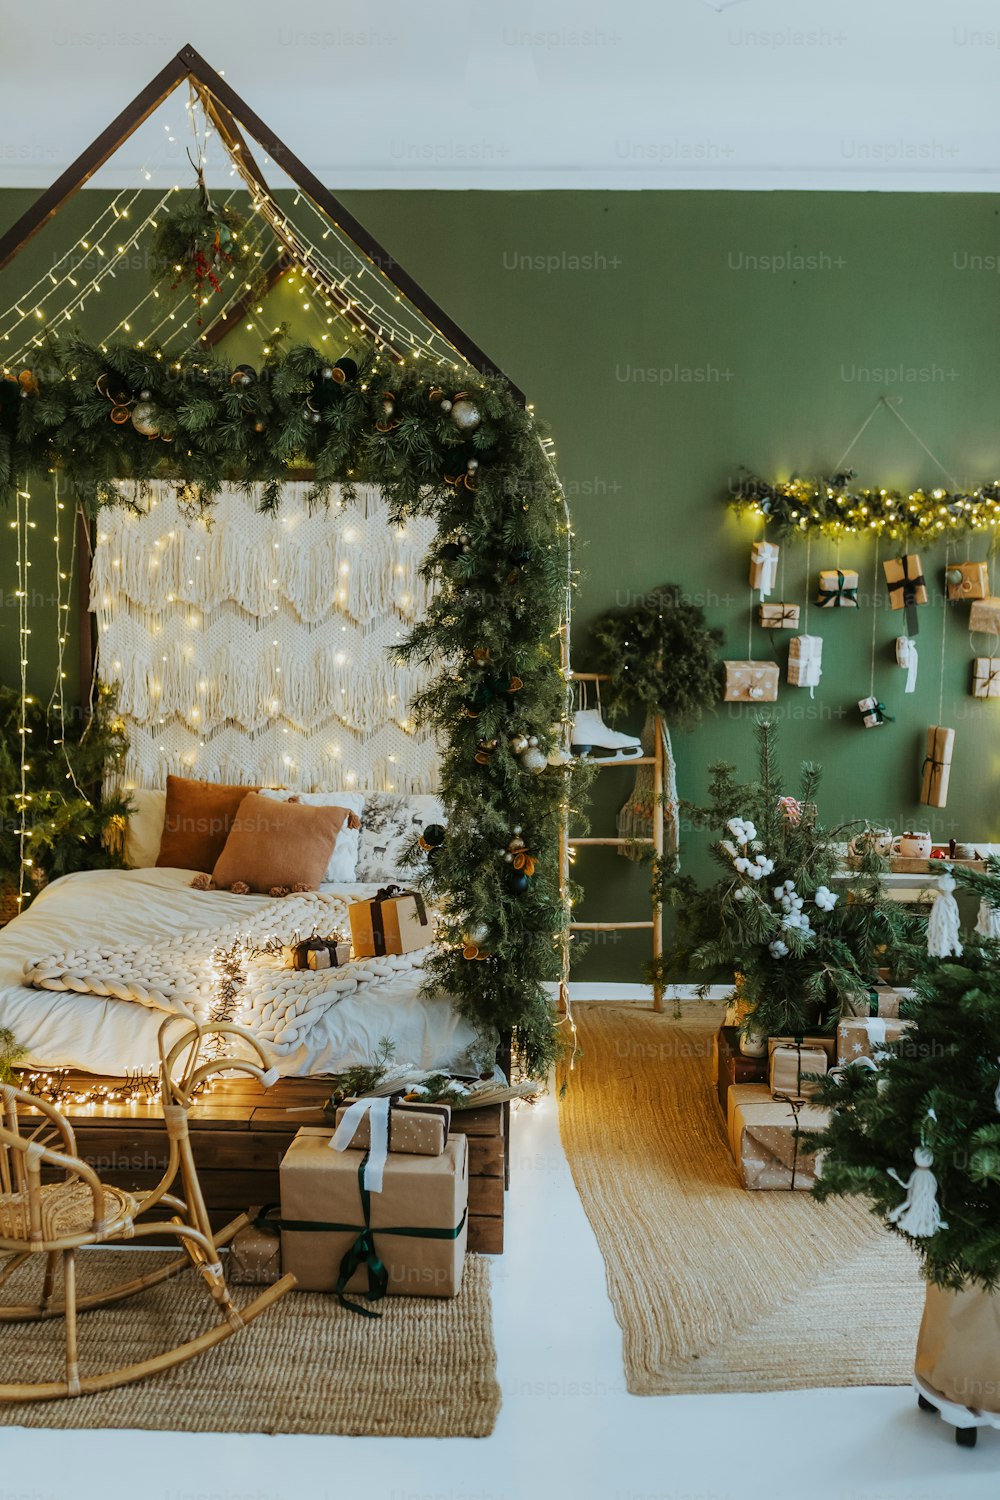 a bedroom decorated for christmas with lights and presents